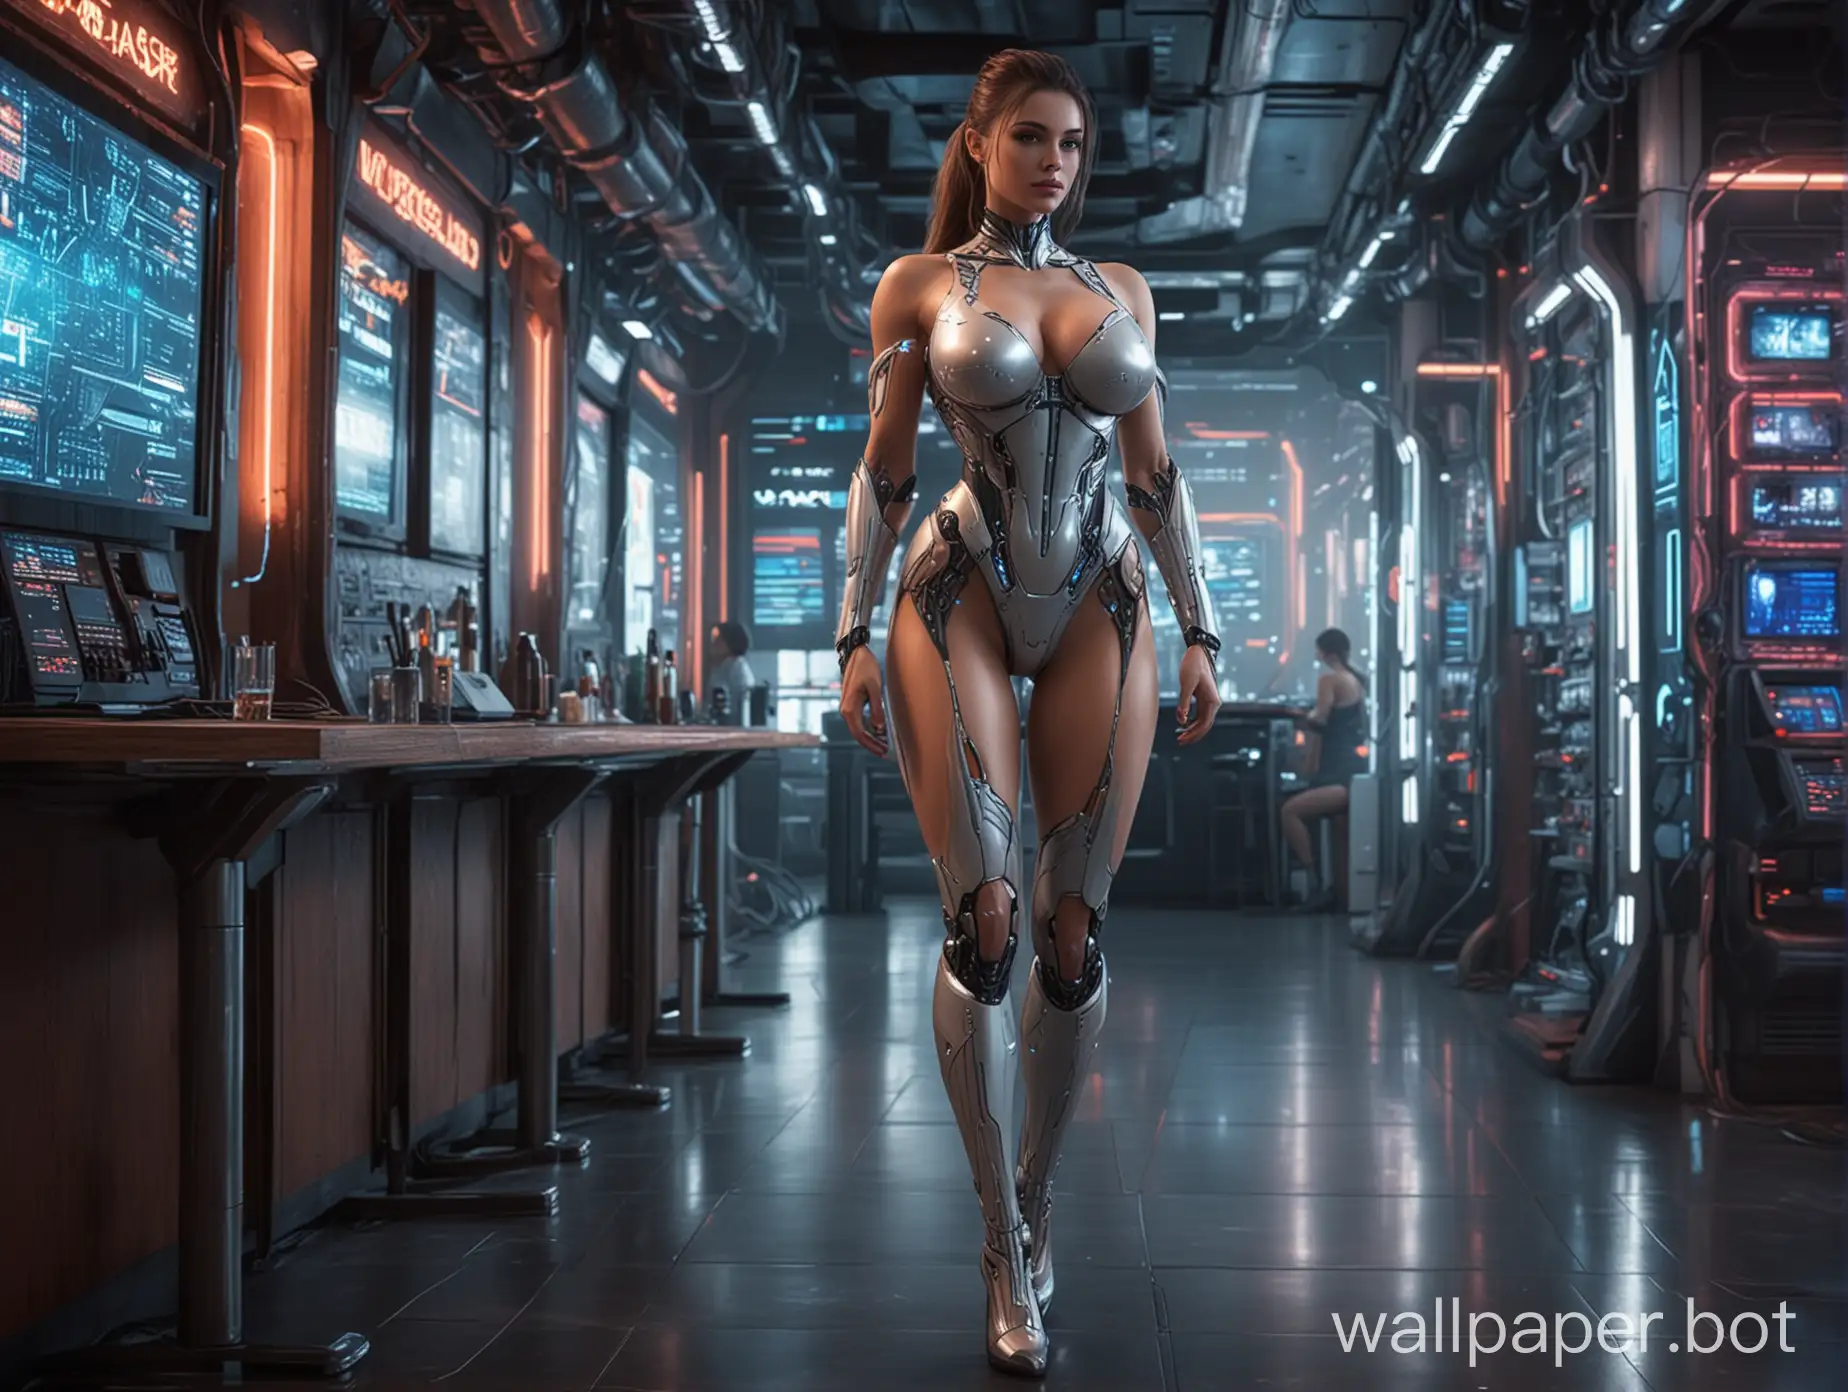 Futuristic-Cyber-Woman-with-Enhanced-Physique-in-HighTech-Bar